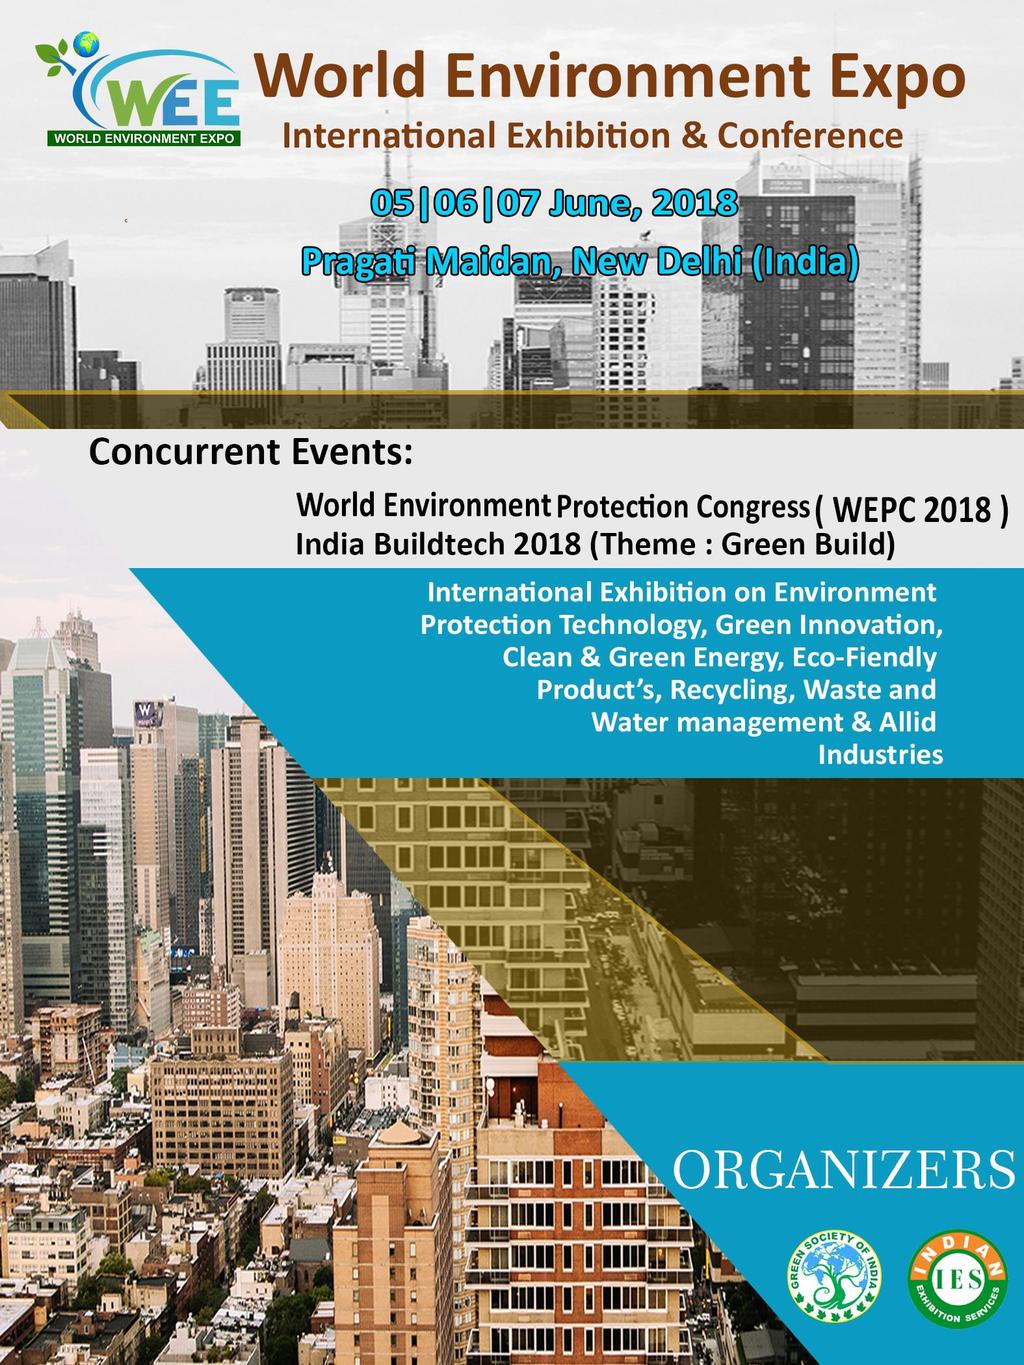 The event will promote and develop new adaptive strategies to save the endangered life species, ecosystems and prevent global warming in every possible way.